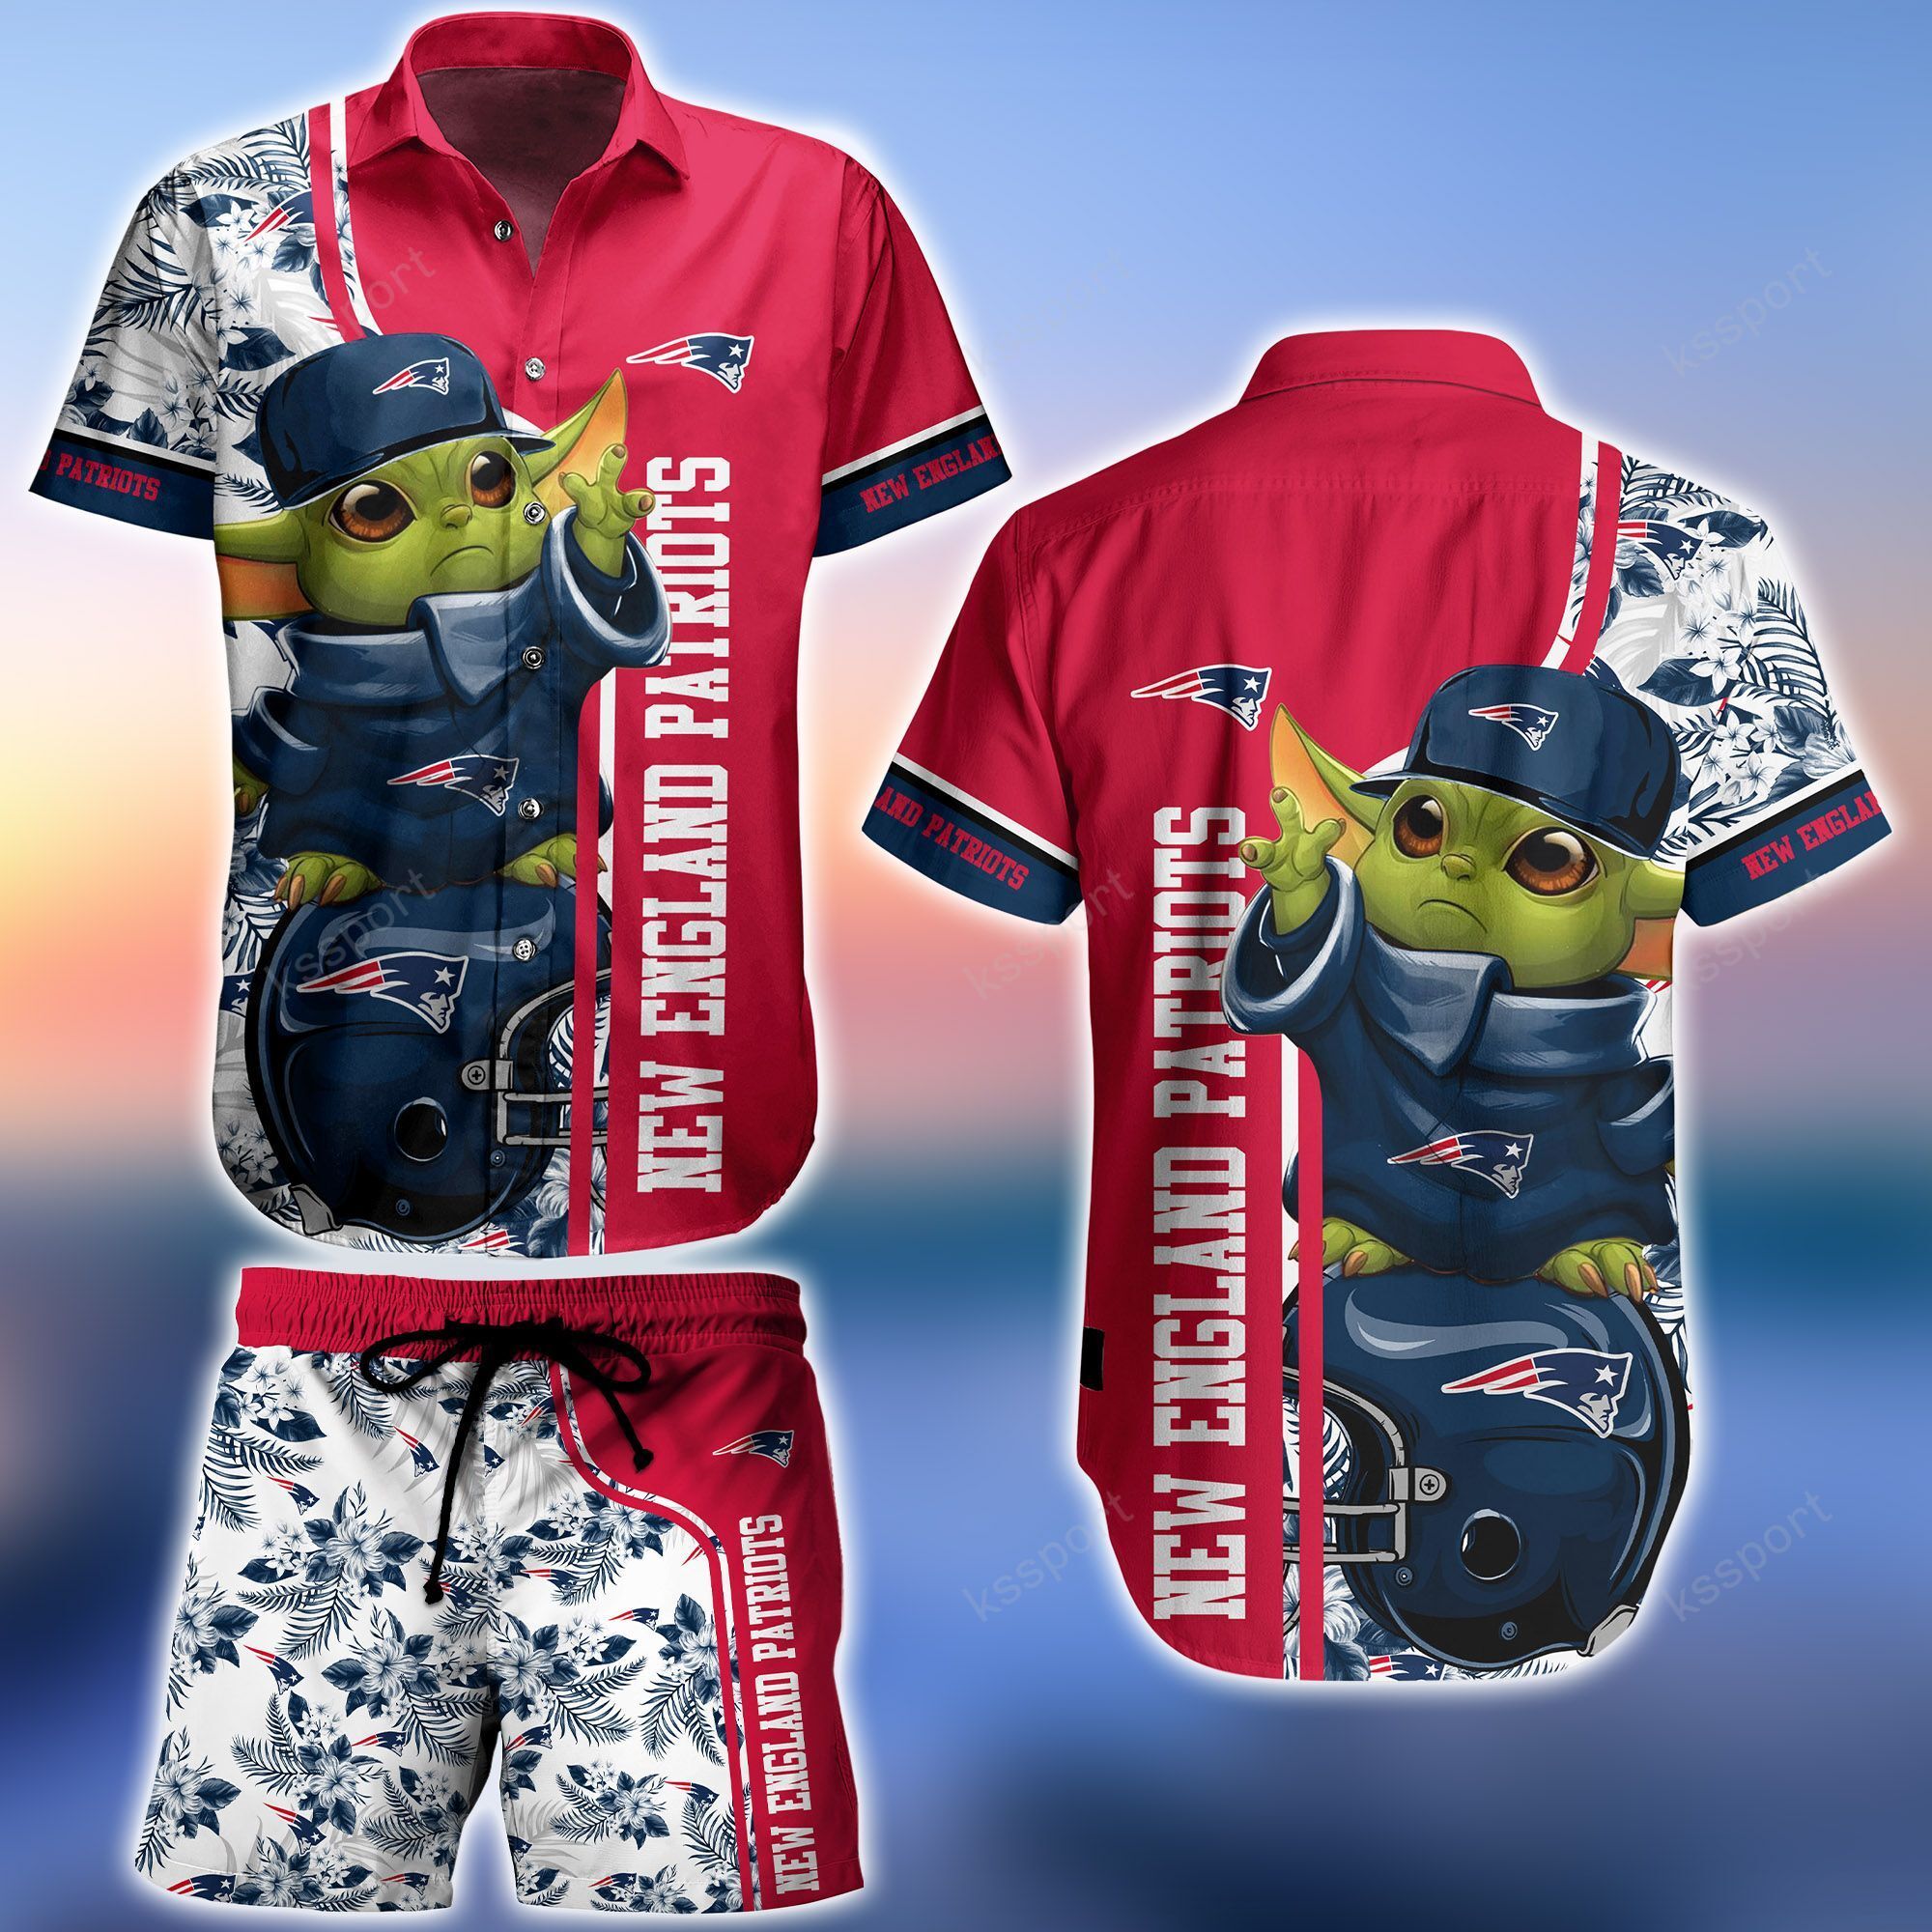 Make sure to check out the latest summer fashion on our website 16